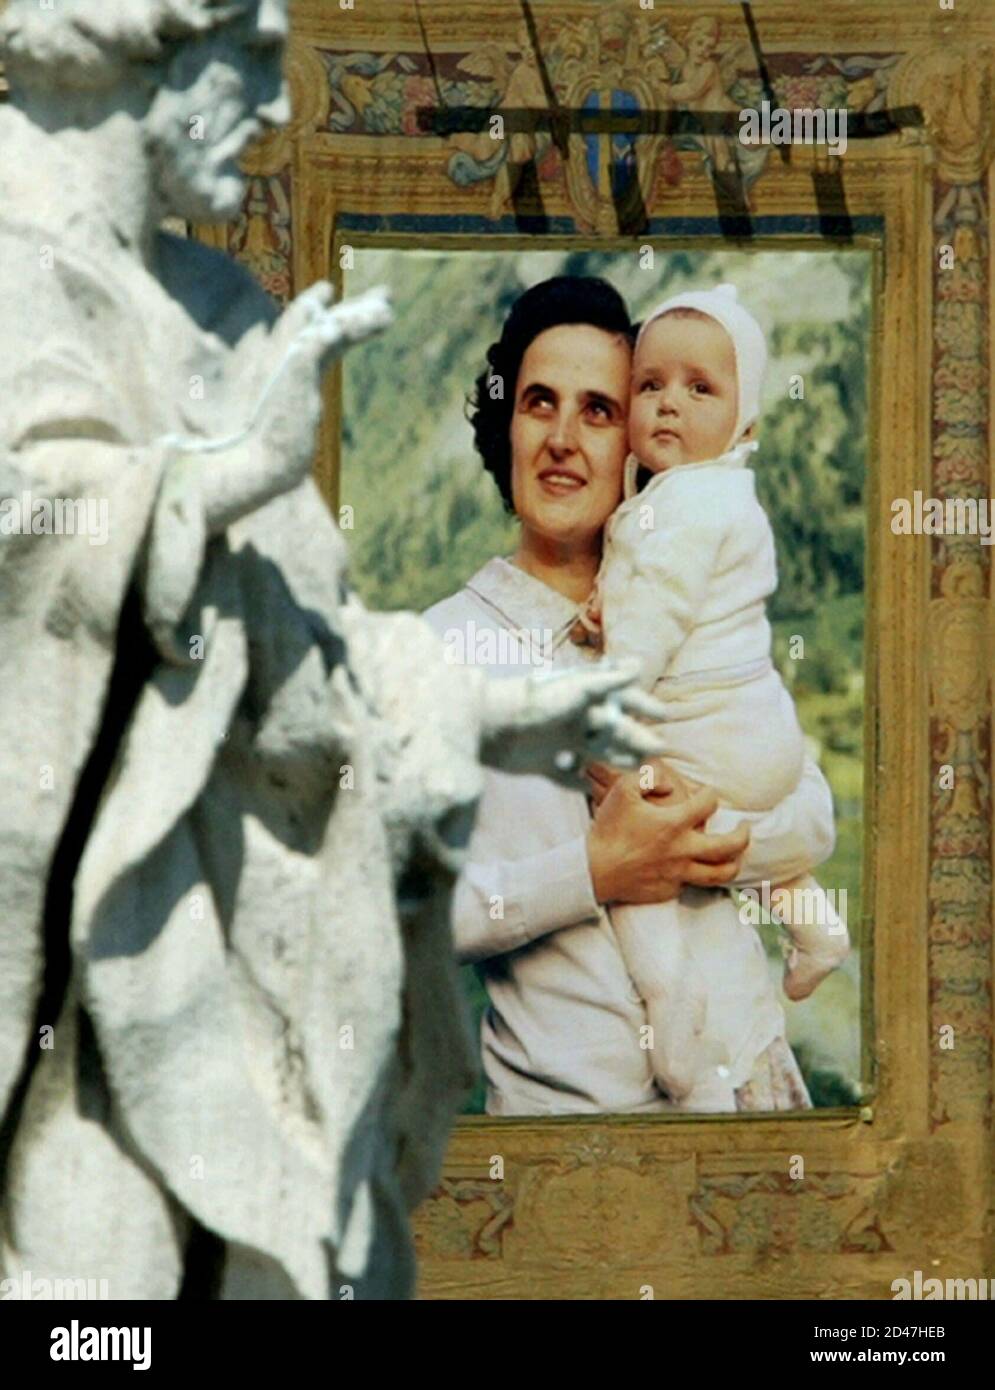 A tapestry depicting Italian Gianna Beretta Molla hangs from Saint Peter's facade during a canonization ceremony [led by Pope John Paul II] at the Vatican May 16, 2004. [The Pope created six] new saints [on Sunday canonizing Italian woman Gianna Beretta Molla, two Italian priests, Luigi Orione and Annibale Maria di Francia, Italian nun Paola Elisabetta Cerioli, Lebanese priest Nimatullah Kassab Al-Hardini and Spanish priest Josep Manyanet Y Vives.] Gianna Beretta Molla became a symbol of the anti-abortion movement for saving her unborn child at the cost of her own life. Stock Photo